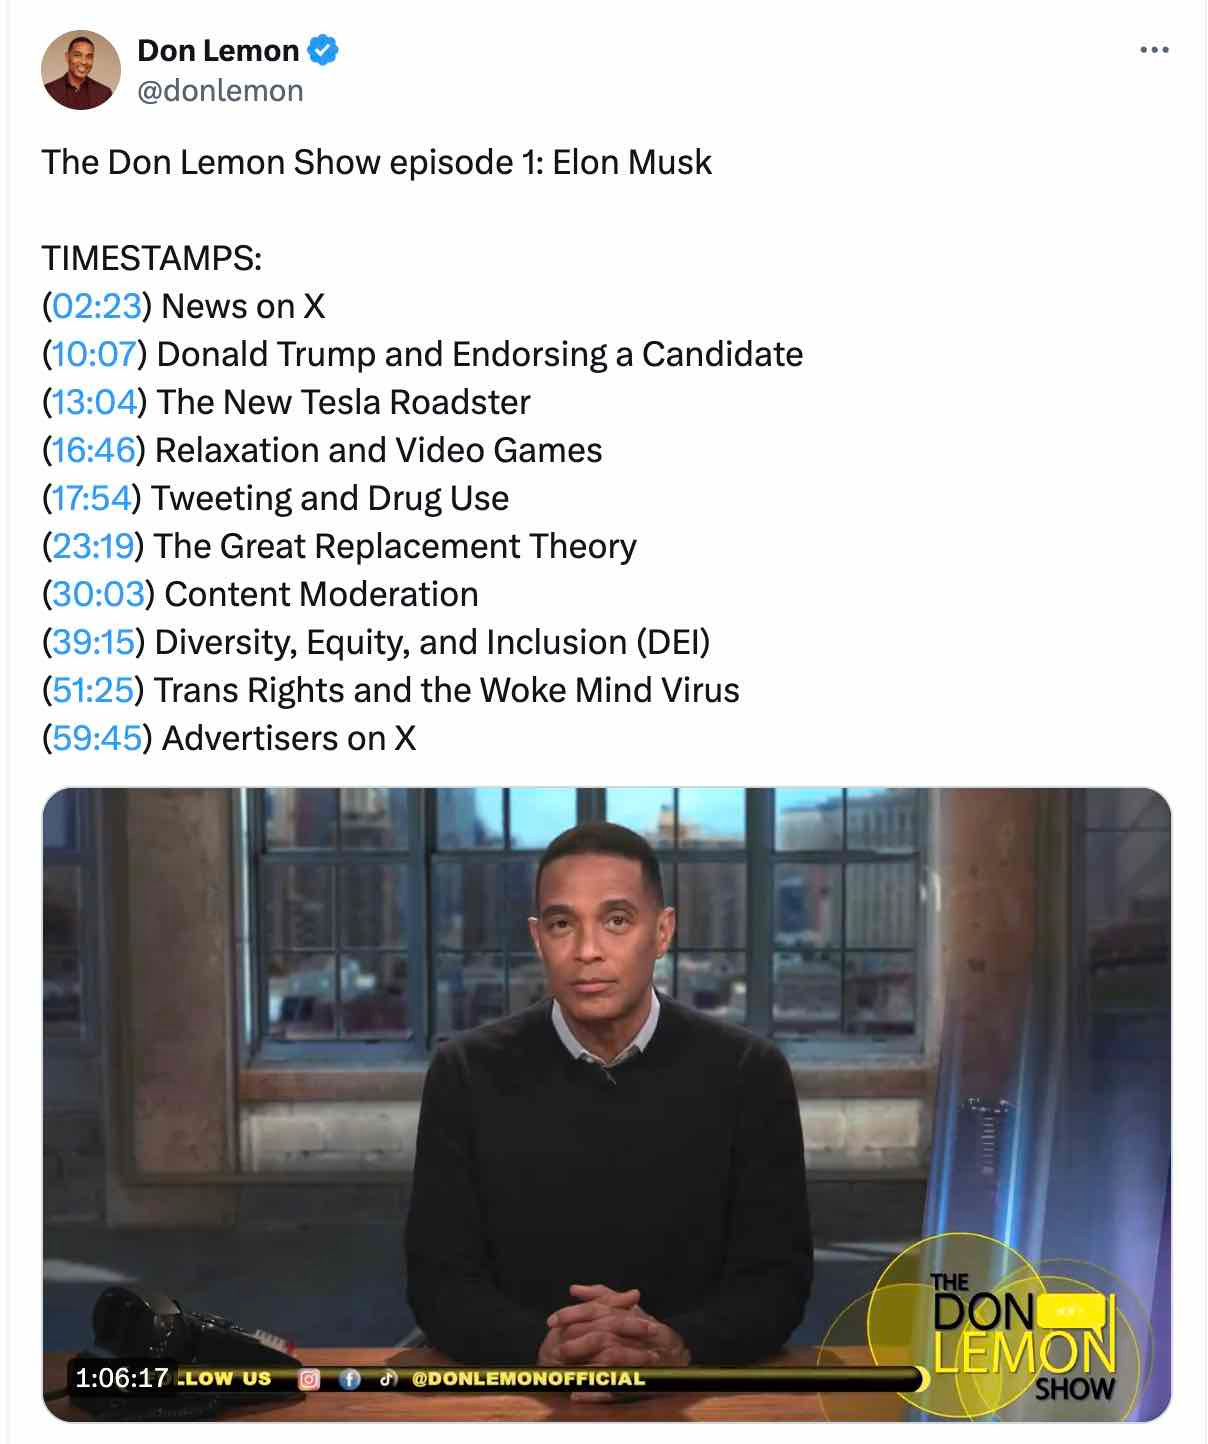 How Don Lemon provided timestamps in his interview with Elon Musk